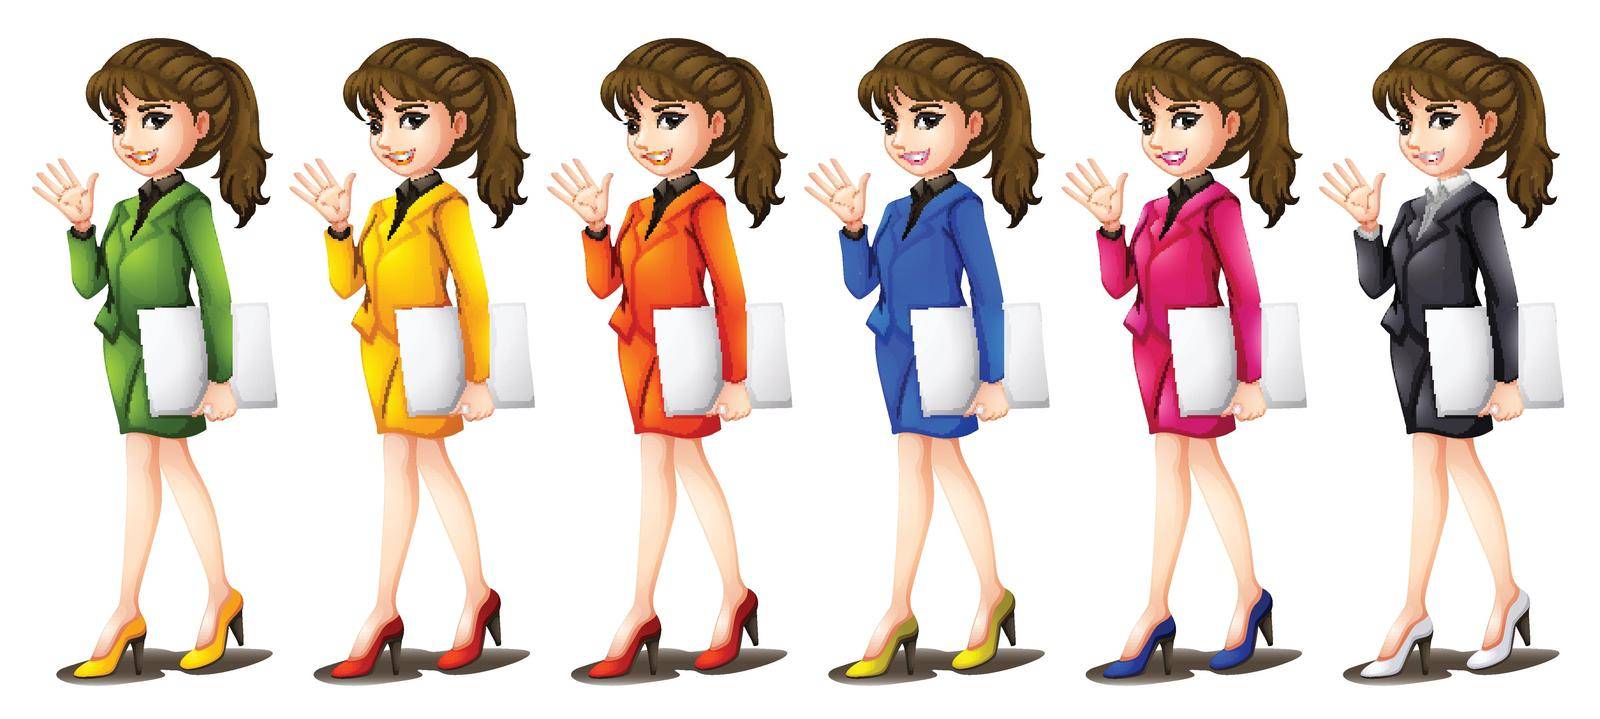 Illustration of the office workers in different uniforms on a white background